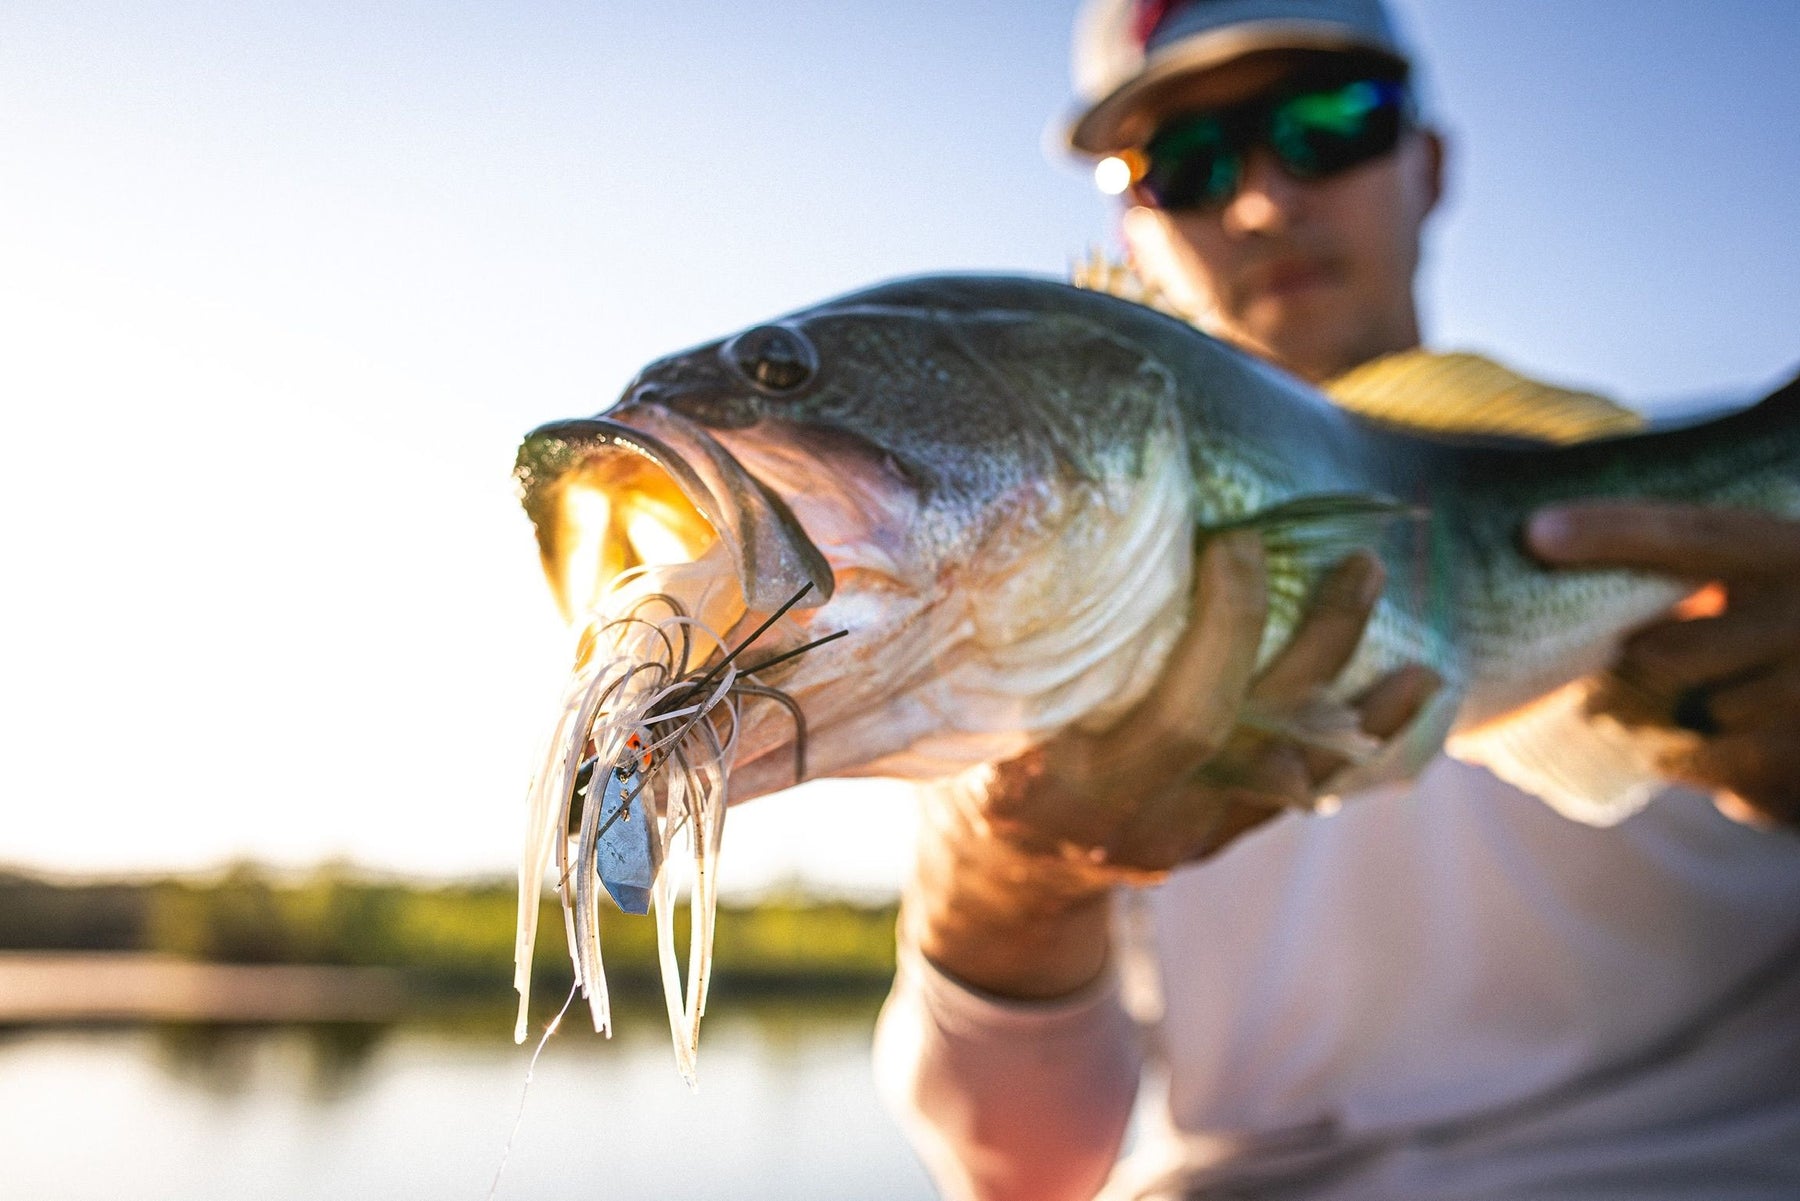 Image of a sport fisherman holding a bass with a ChatterBait in its mouth